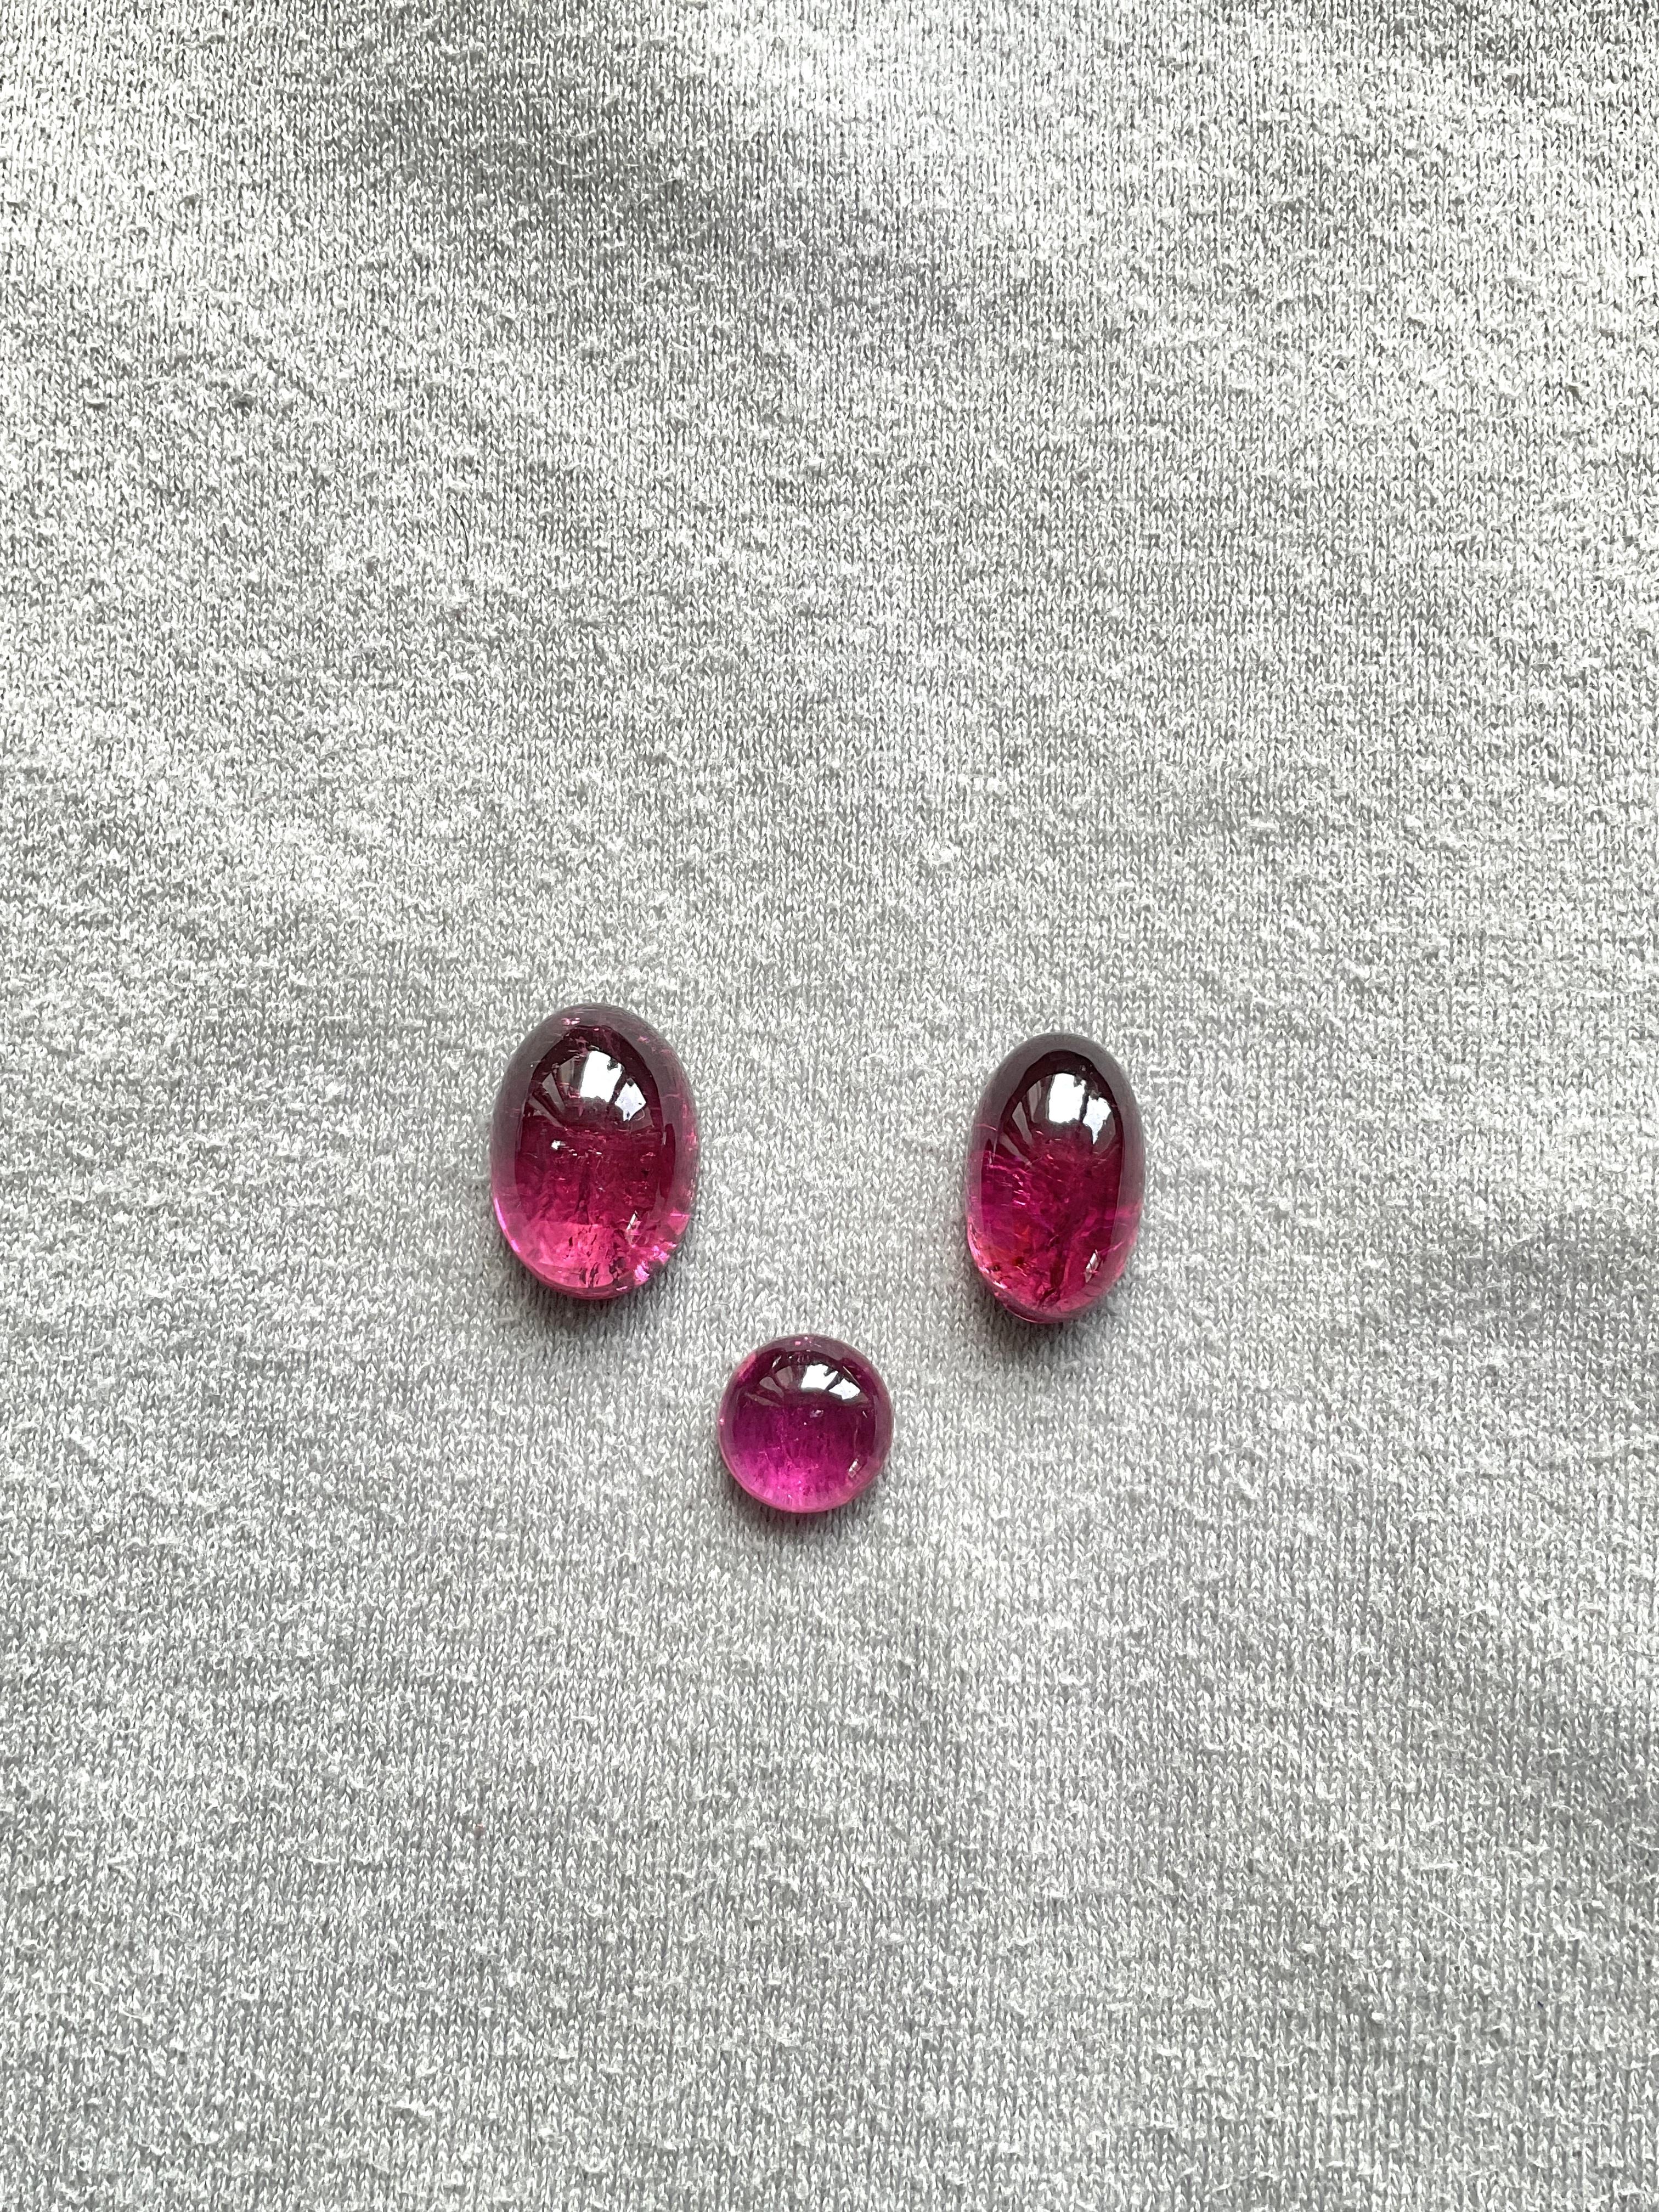 25.21 Carats Top Quality Rubellite Tourmaline Cabochon 3 Pieces Natural Gemstone In New Condition For Sale In Jaipur, RJ